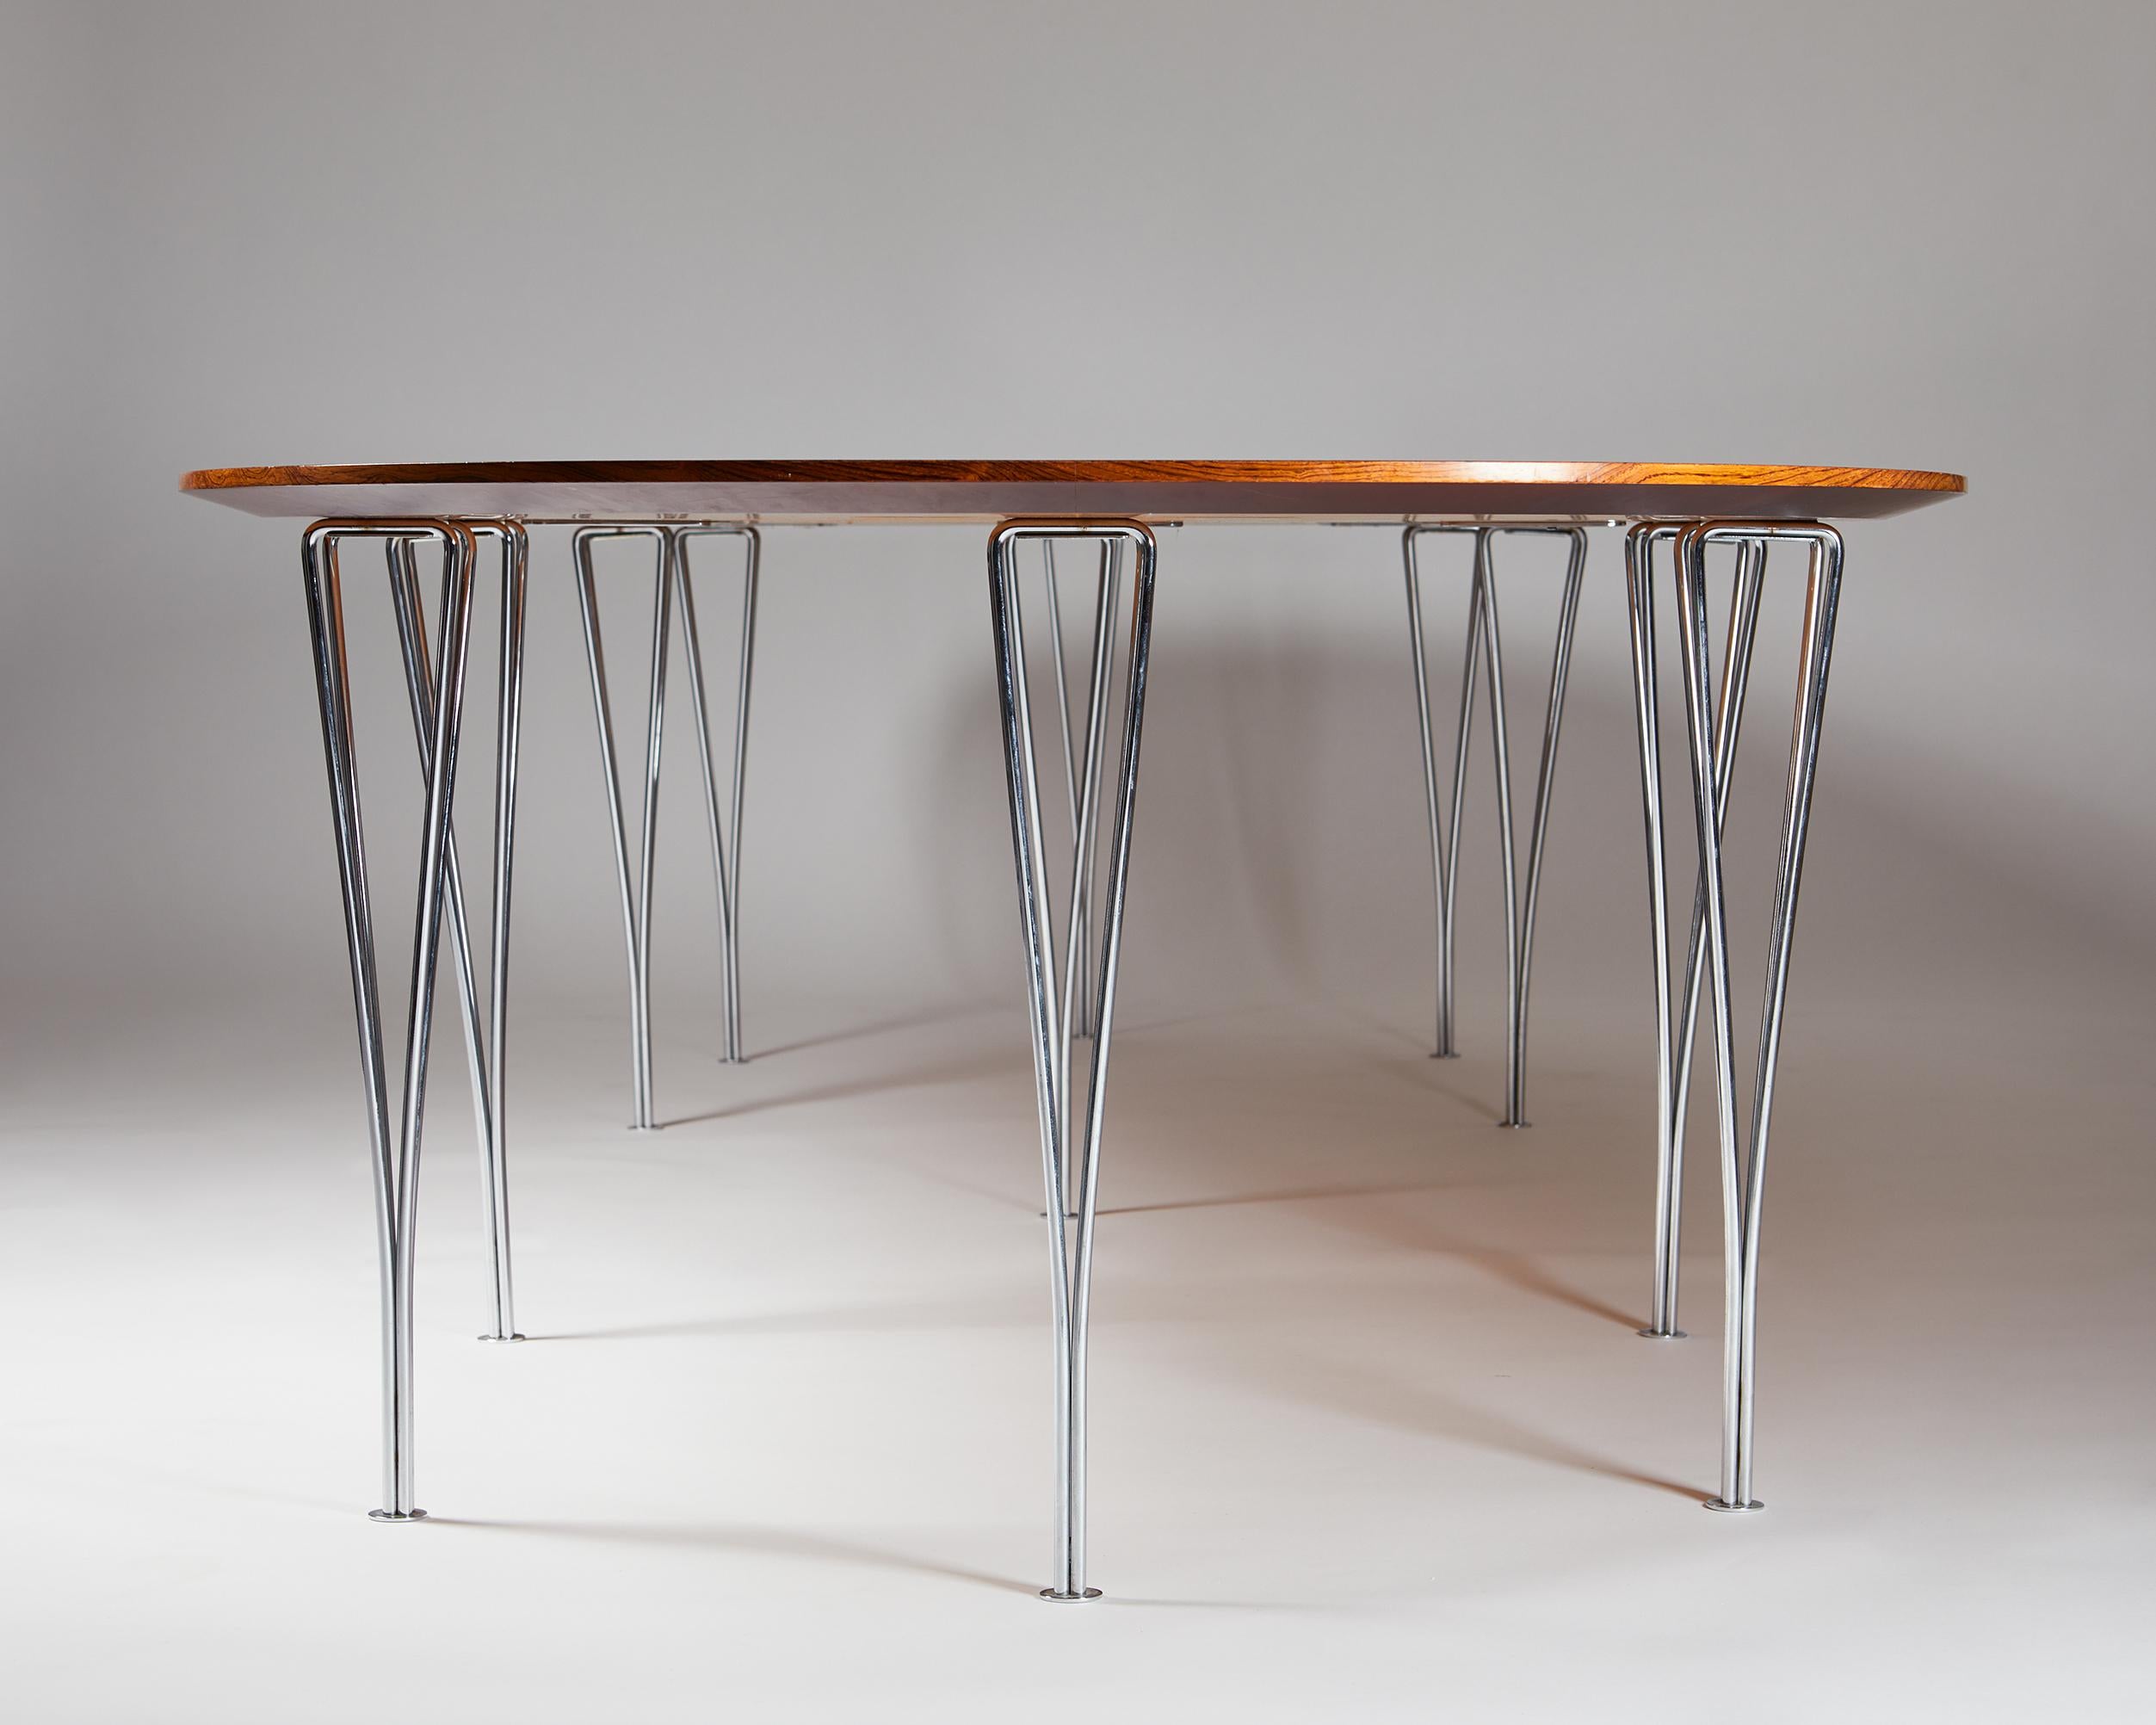 20th Century Dining Table Designed by Bruno Mathsson and Piet Hein, Denmark, 1980s